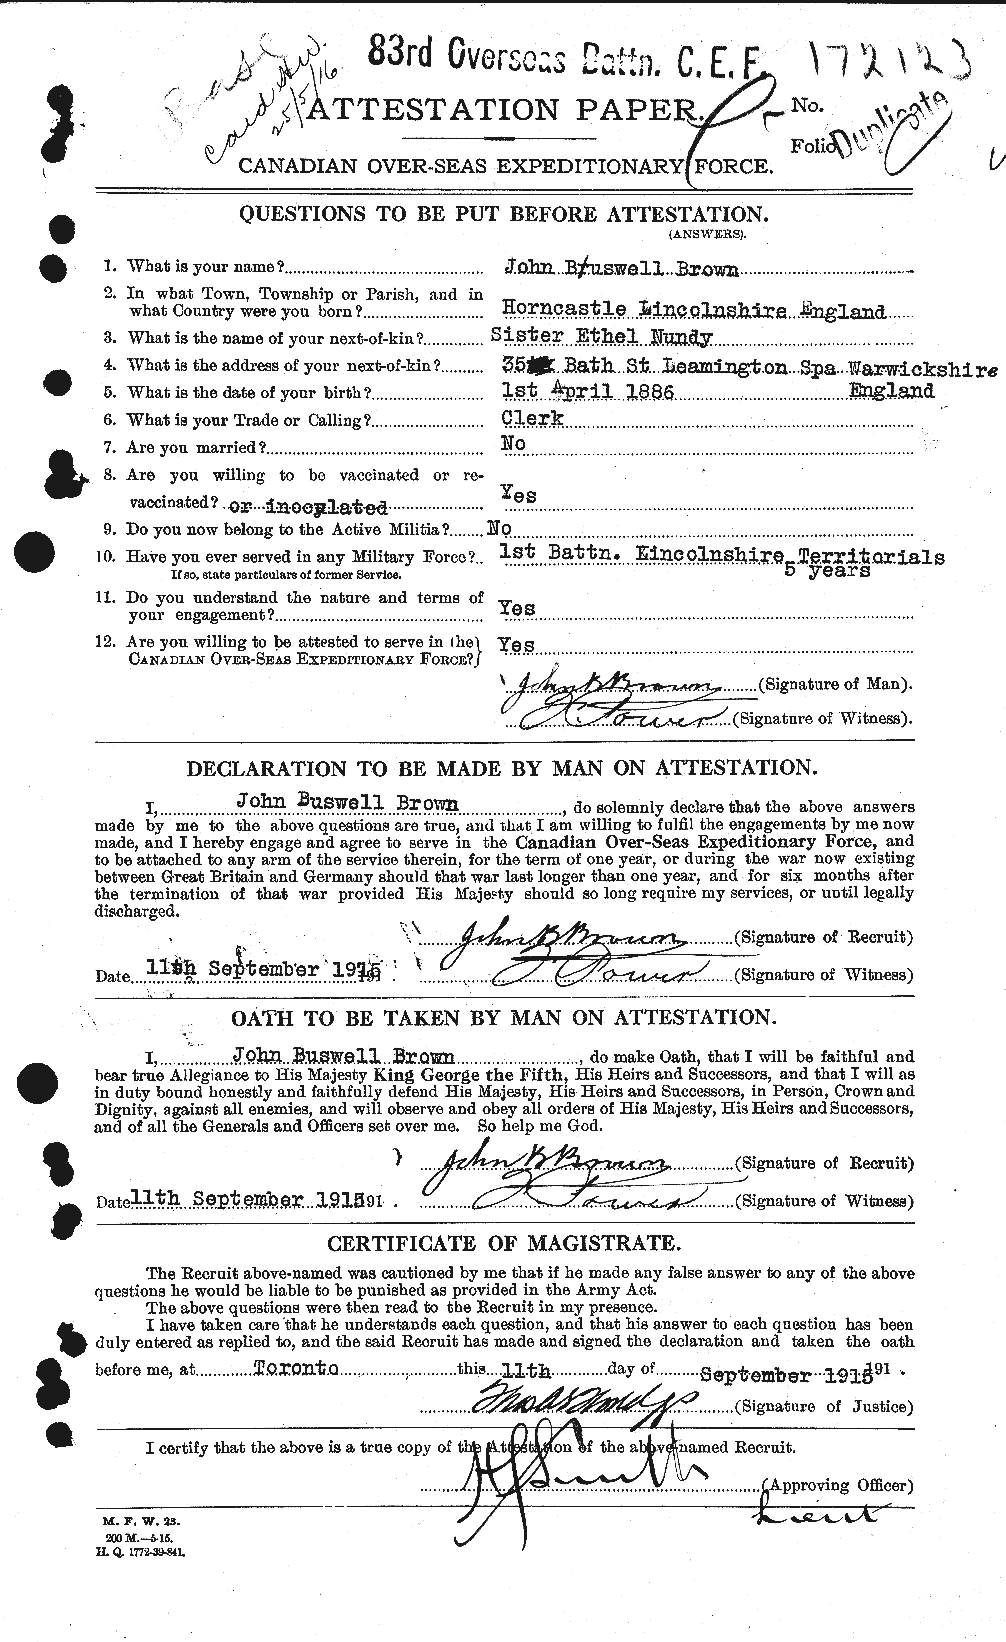 Personnel Records of the First World War - CEF 264573a